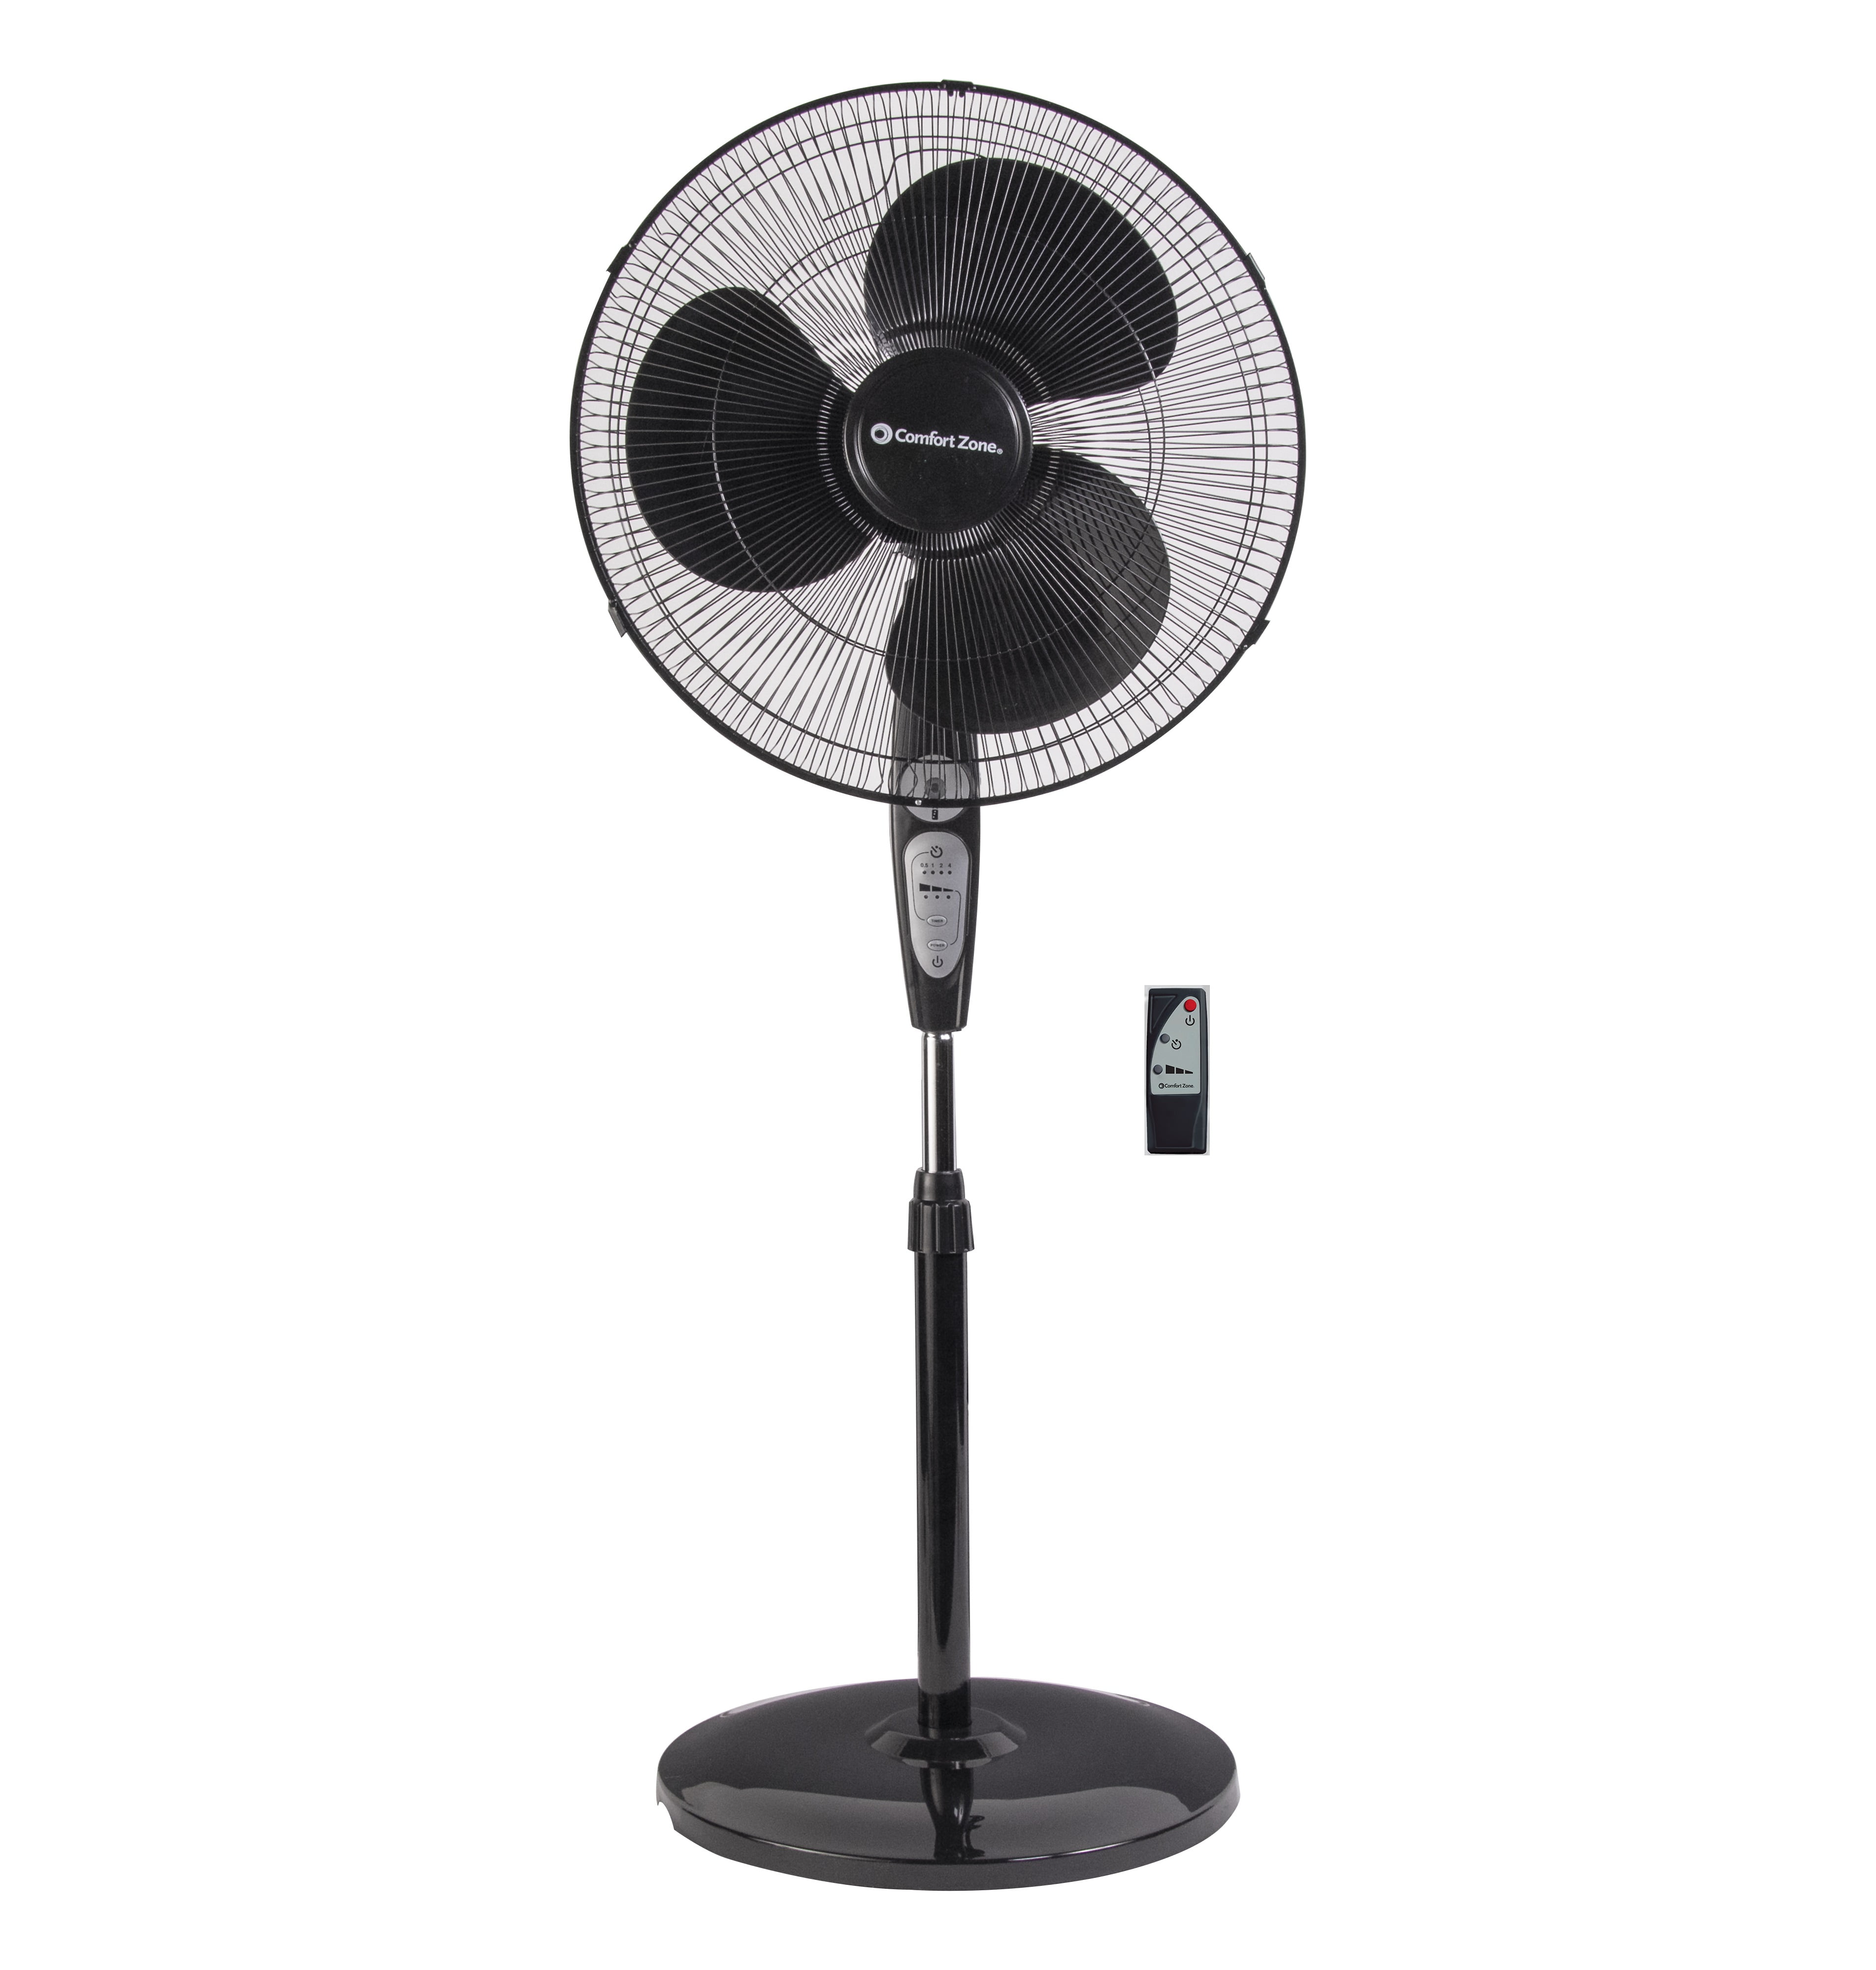 Comfort Zone 18” 3-Speed Oscillating Pedestal Fan with Remote Control,  Adjustable Height, Adjustable Tilt, and Built-in Timer for Auto Shutoff,  Black 